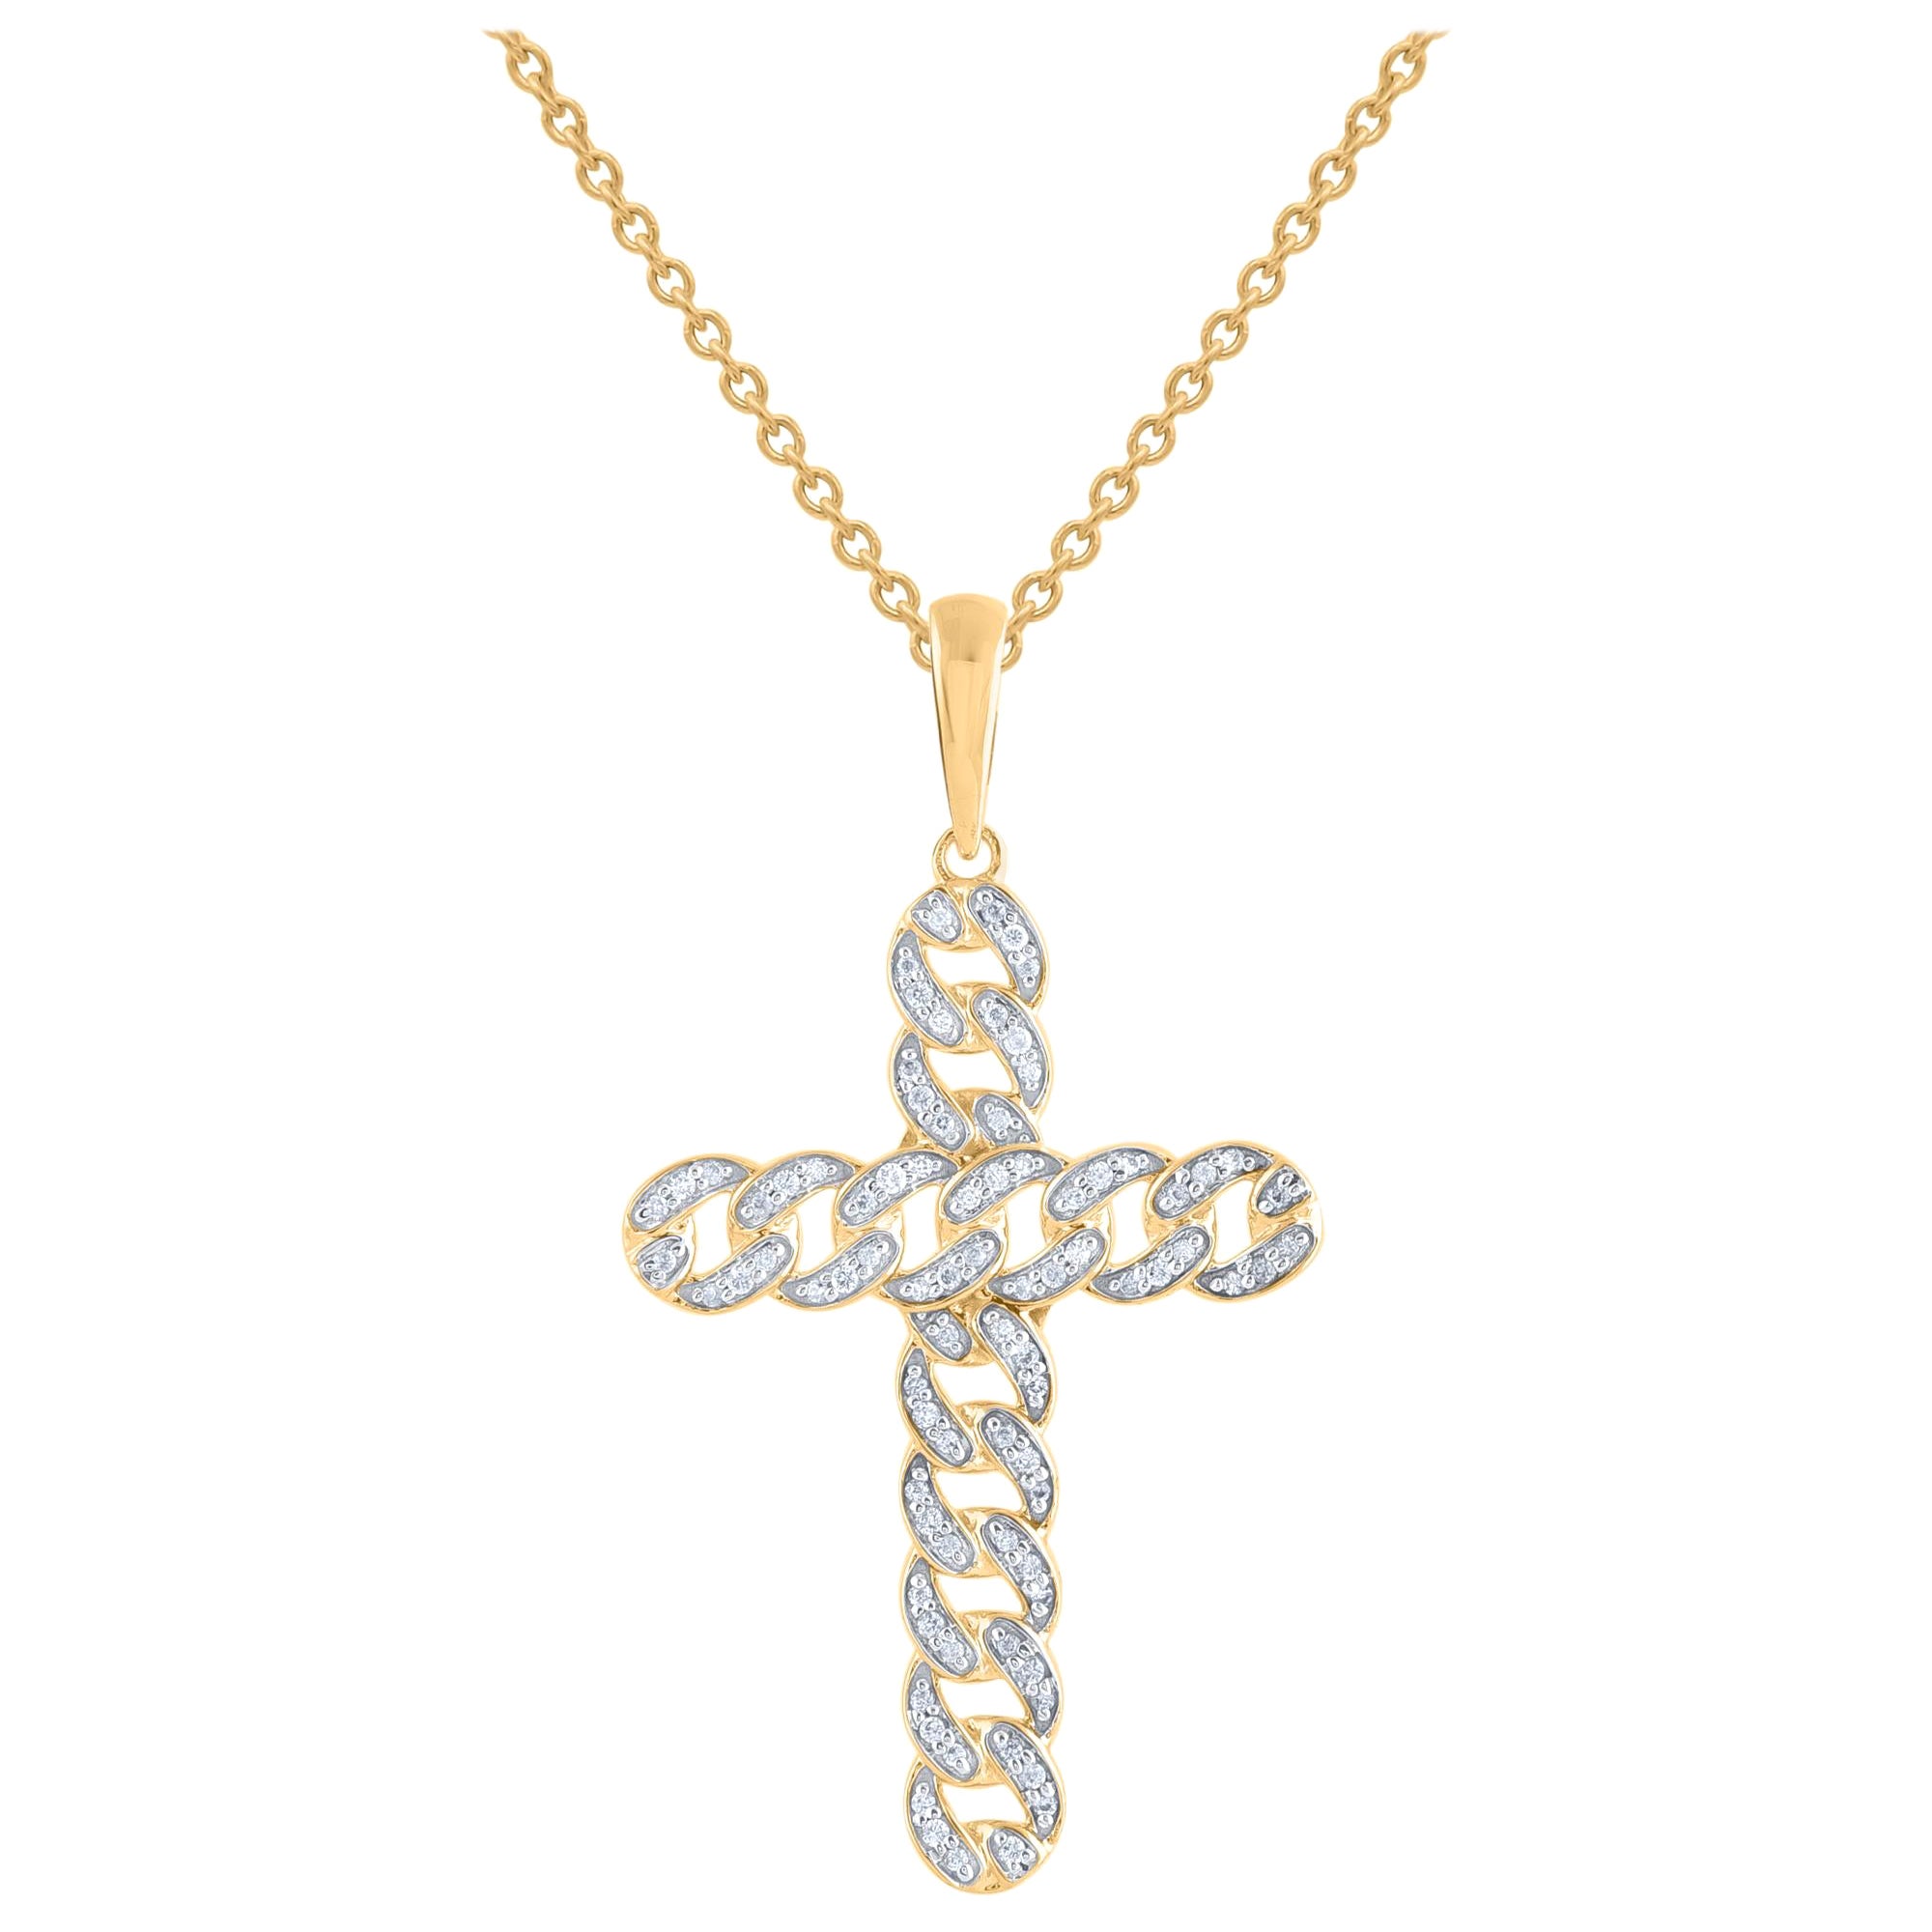 TJD 0.20 Carat Round Cut Diamond Cross Pendant Necklace in 14KT Yellow Gold For Sale